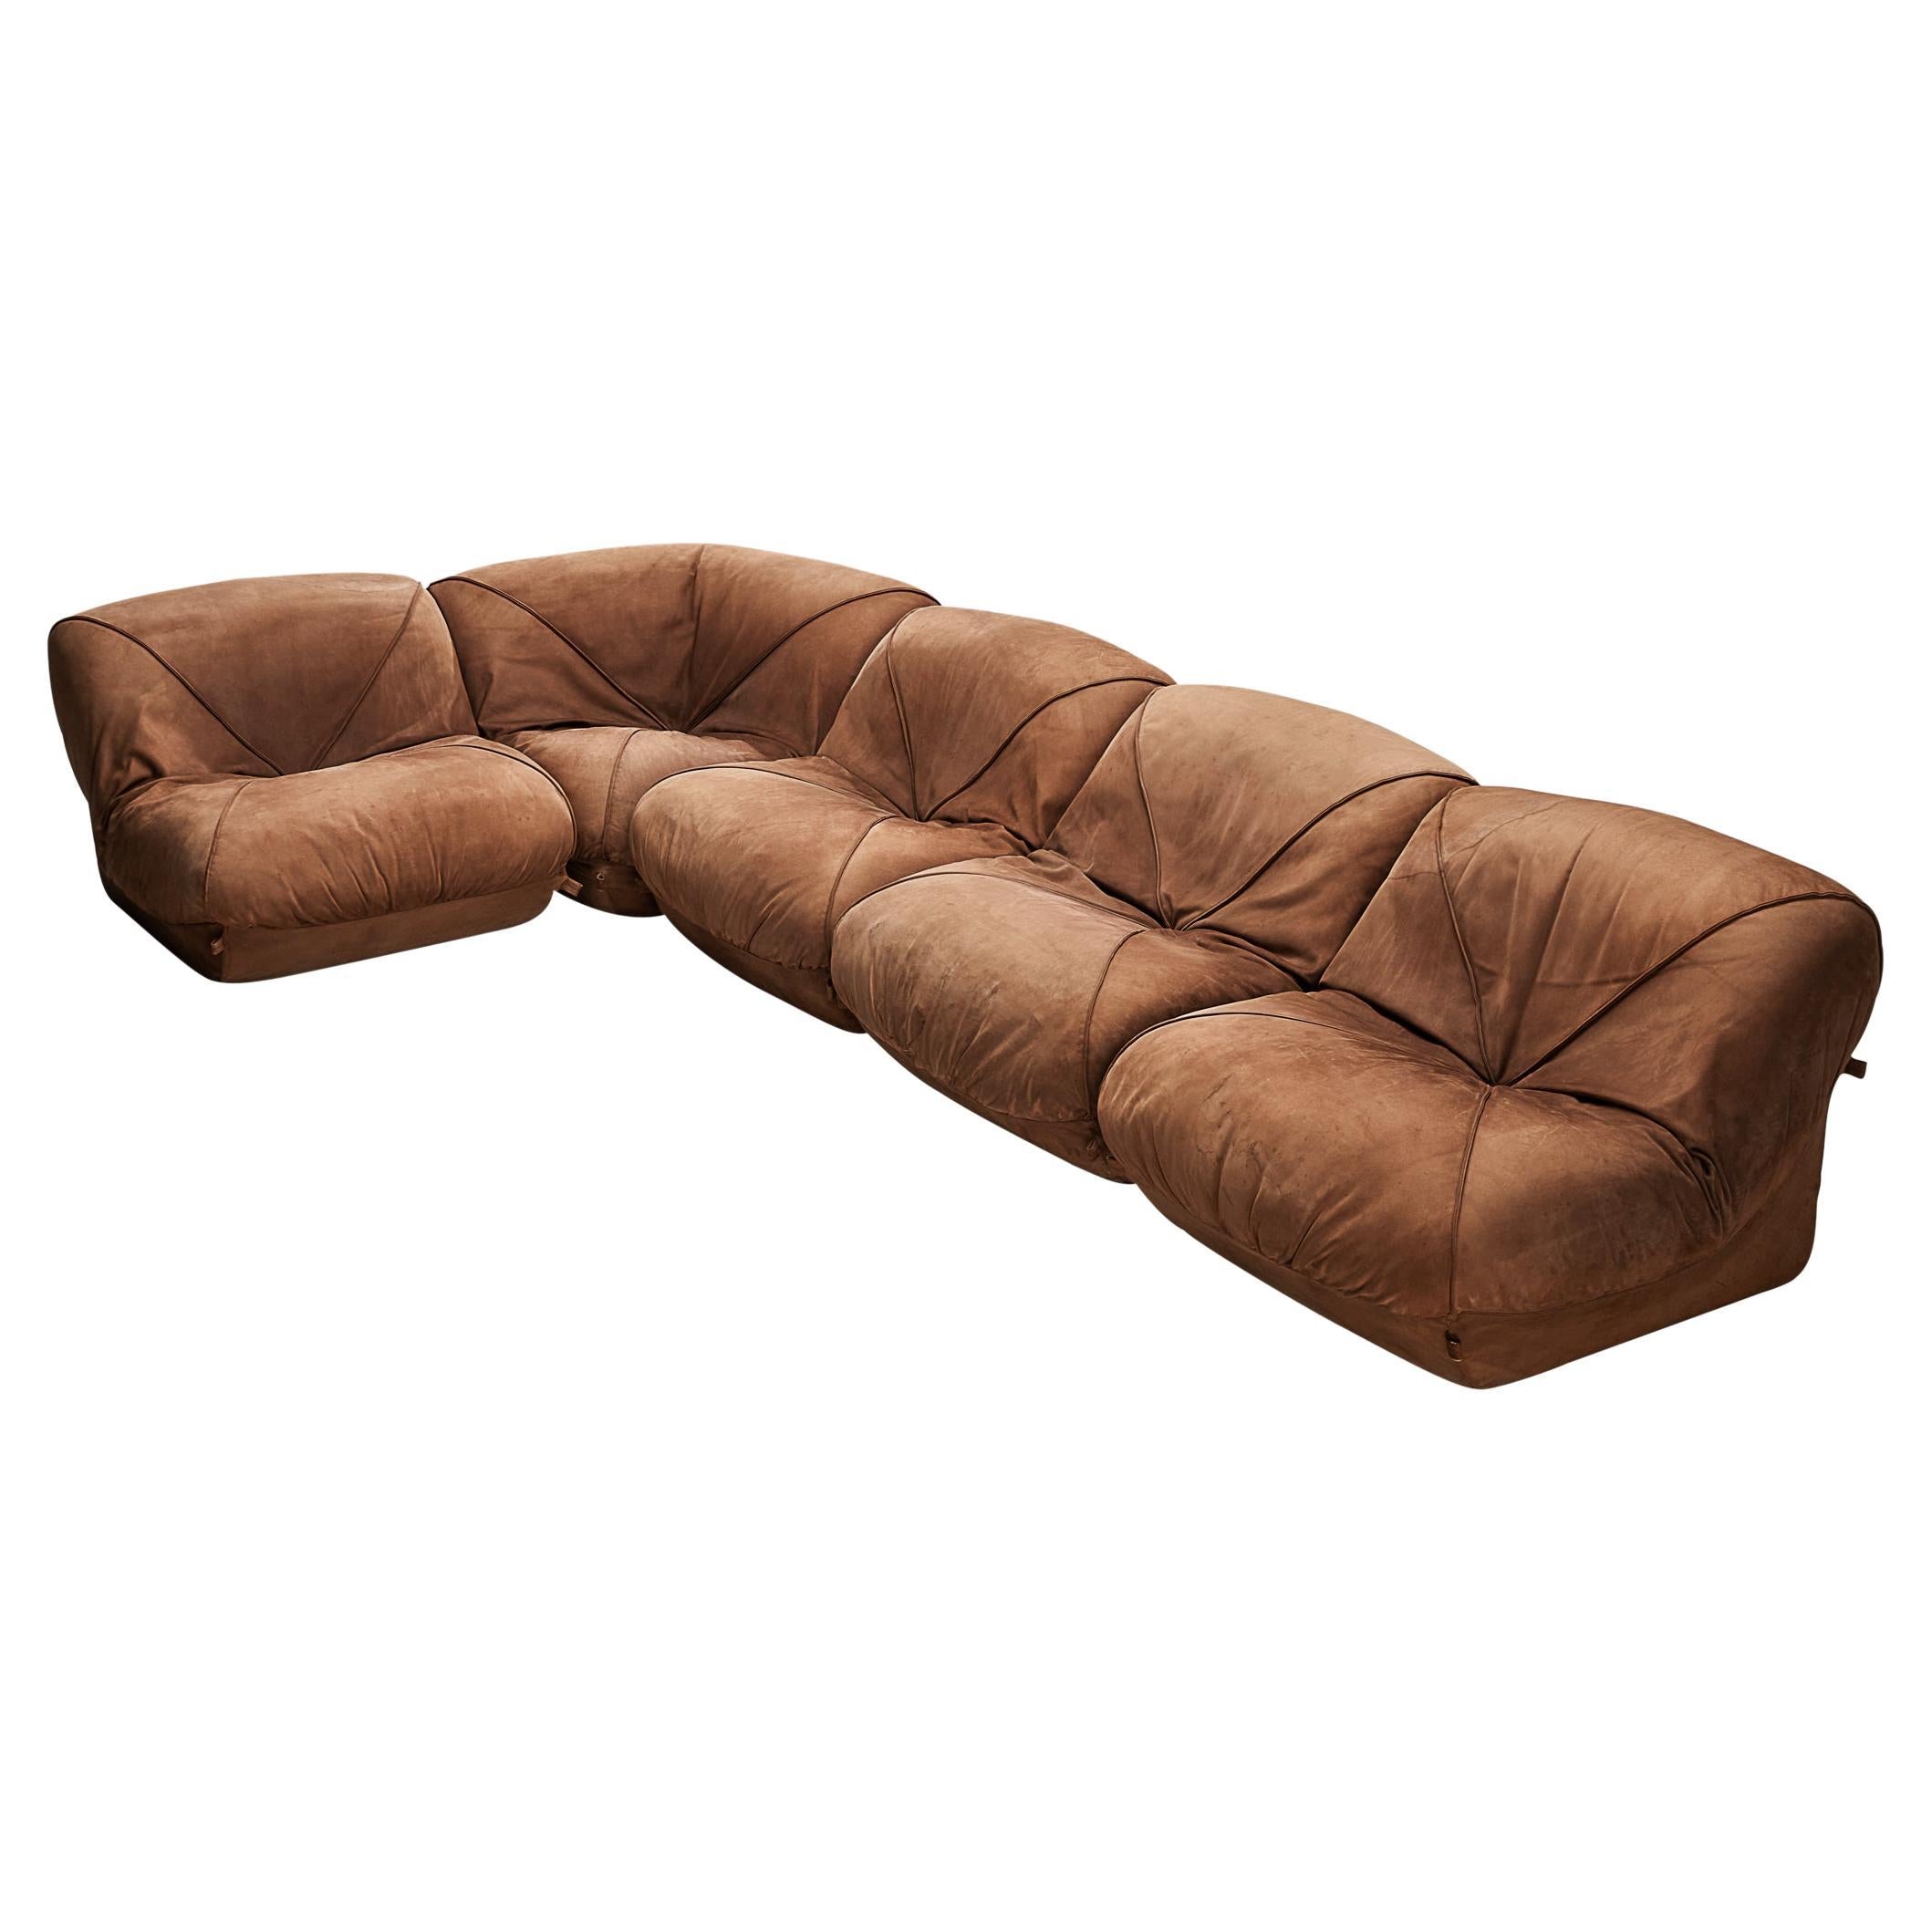 Airborne Sectional Sofa 'Patate' in Brown Suede For Sale